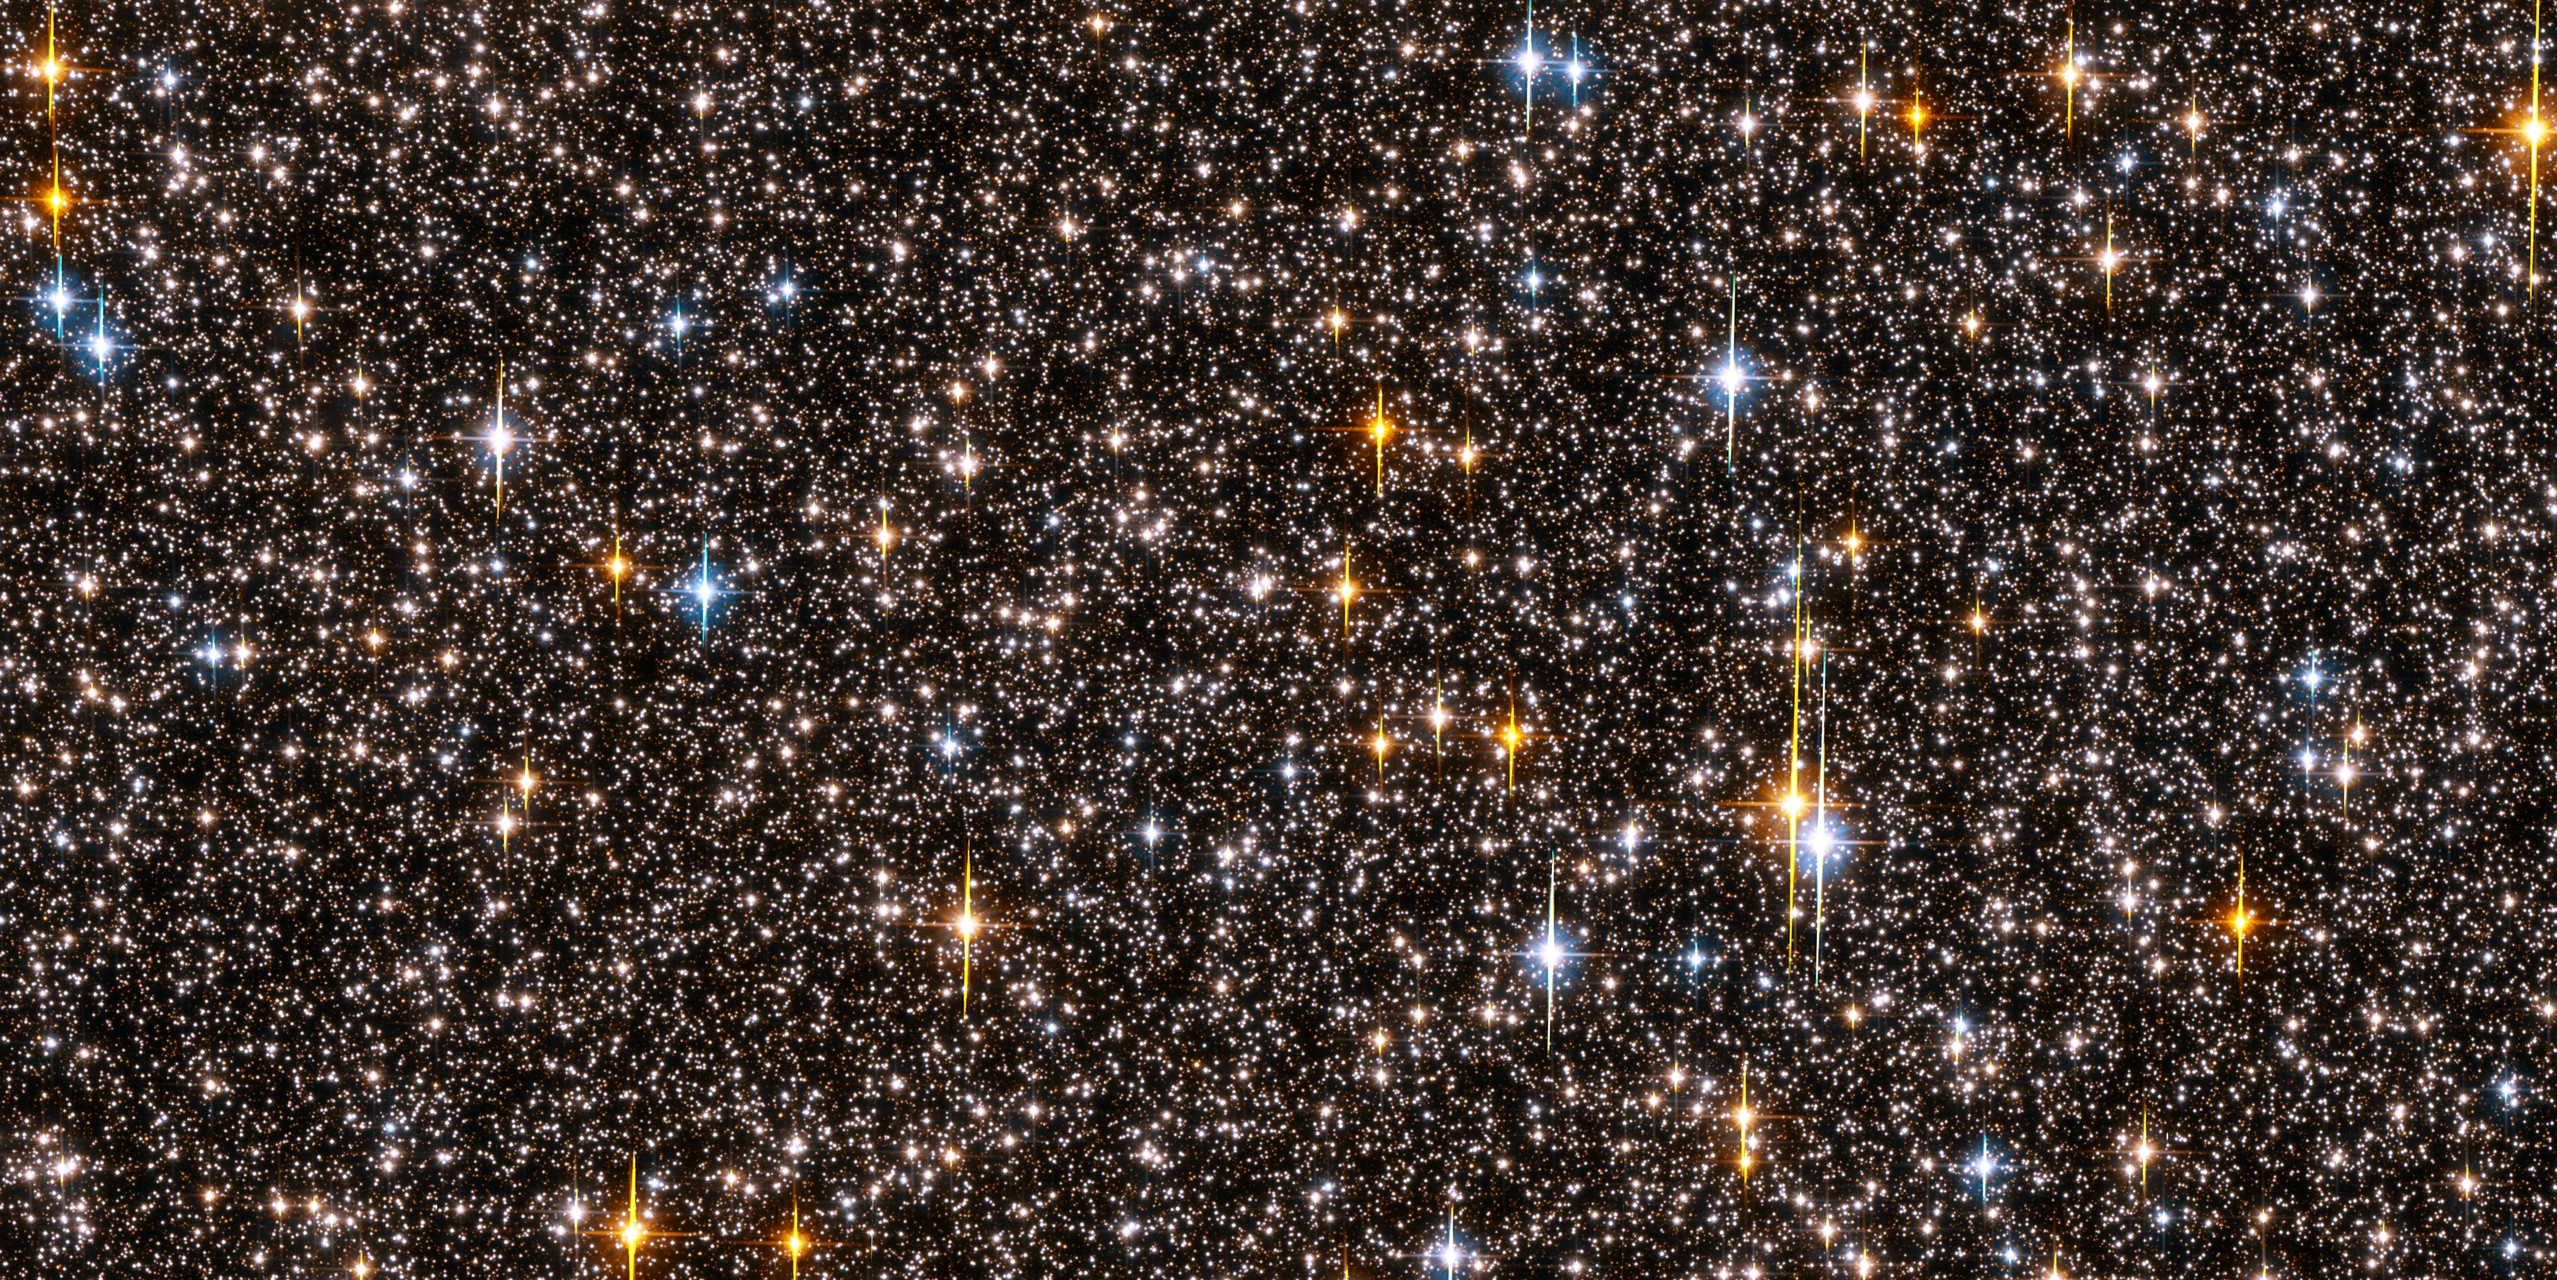 A picture released October 4, 2006 by the European Space Agency shows one-half of the Hubble Space Telescope field of view with nine stars that are orbited by planets with periods of a few days. Planets so close to their stars with such short orbital periods are called "hot Jupiters. (Time &amp; Life Pictures—The LIFE Picture Collection/Gett)